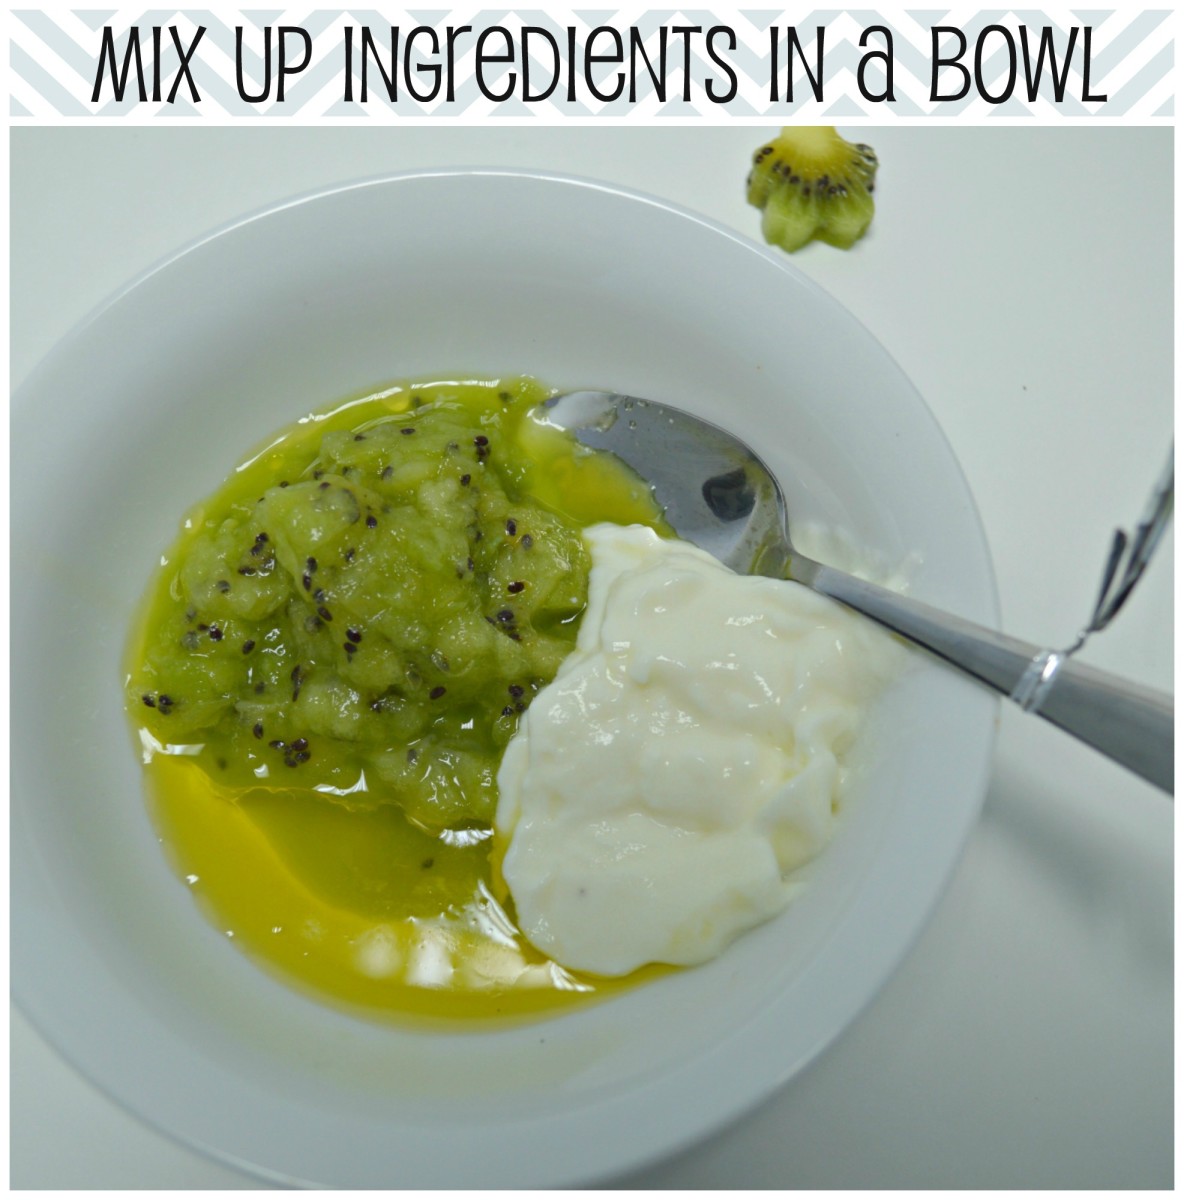 Mix up the ingredients with a fork, spoon, or blender.